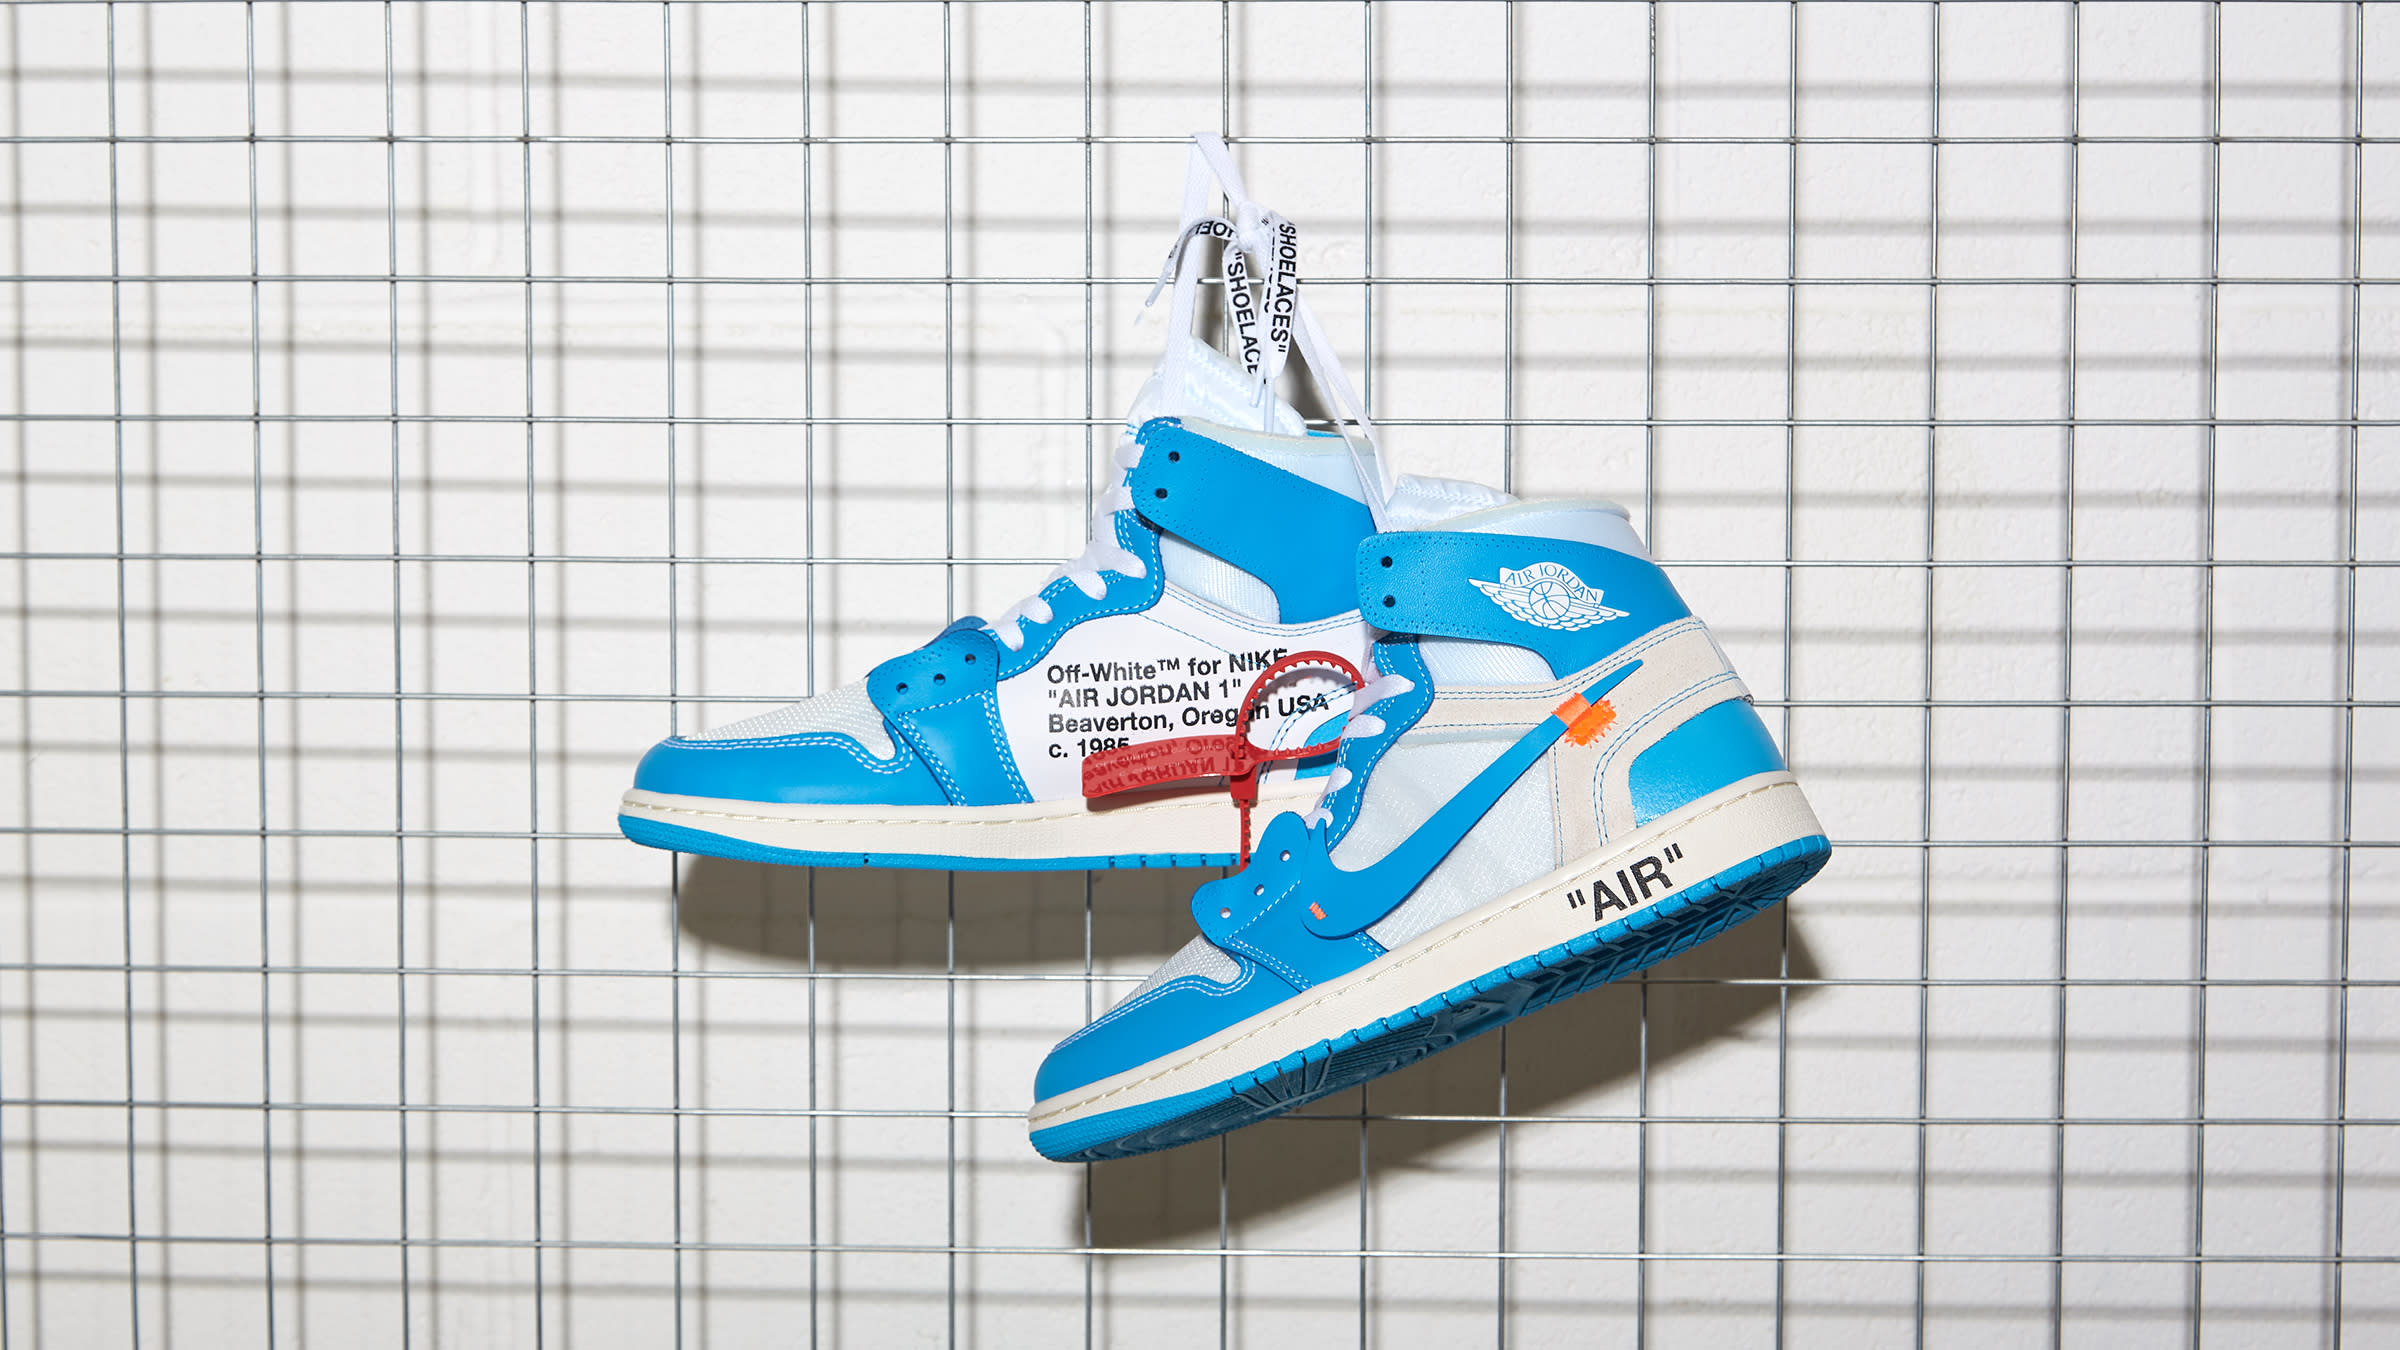 New product launch Air Jordan 1 x OFF-WHITE NRG x PLAYSTATION 5